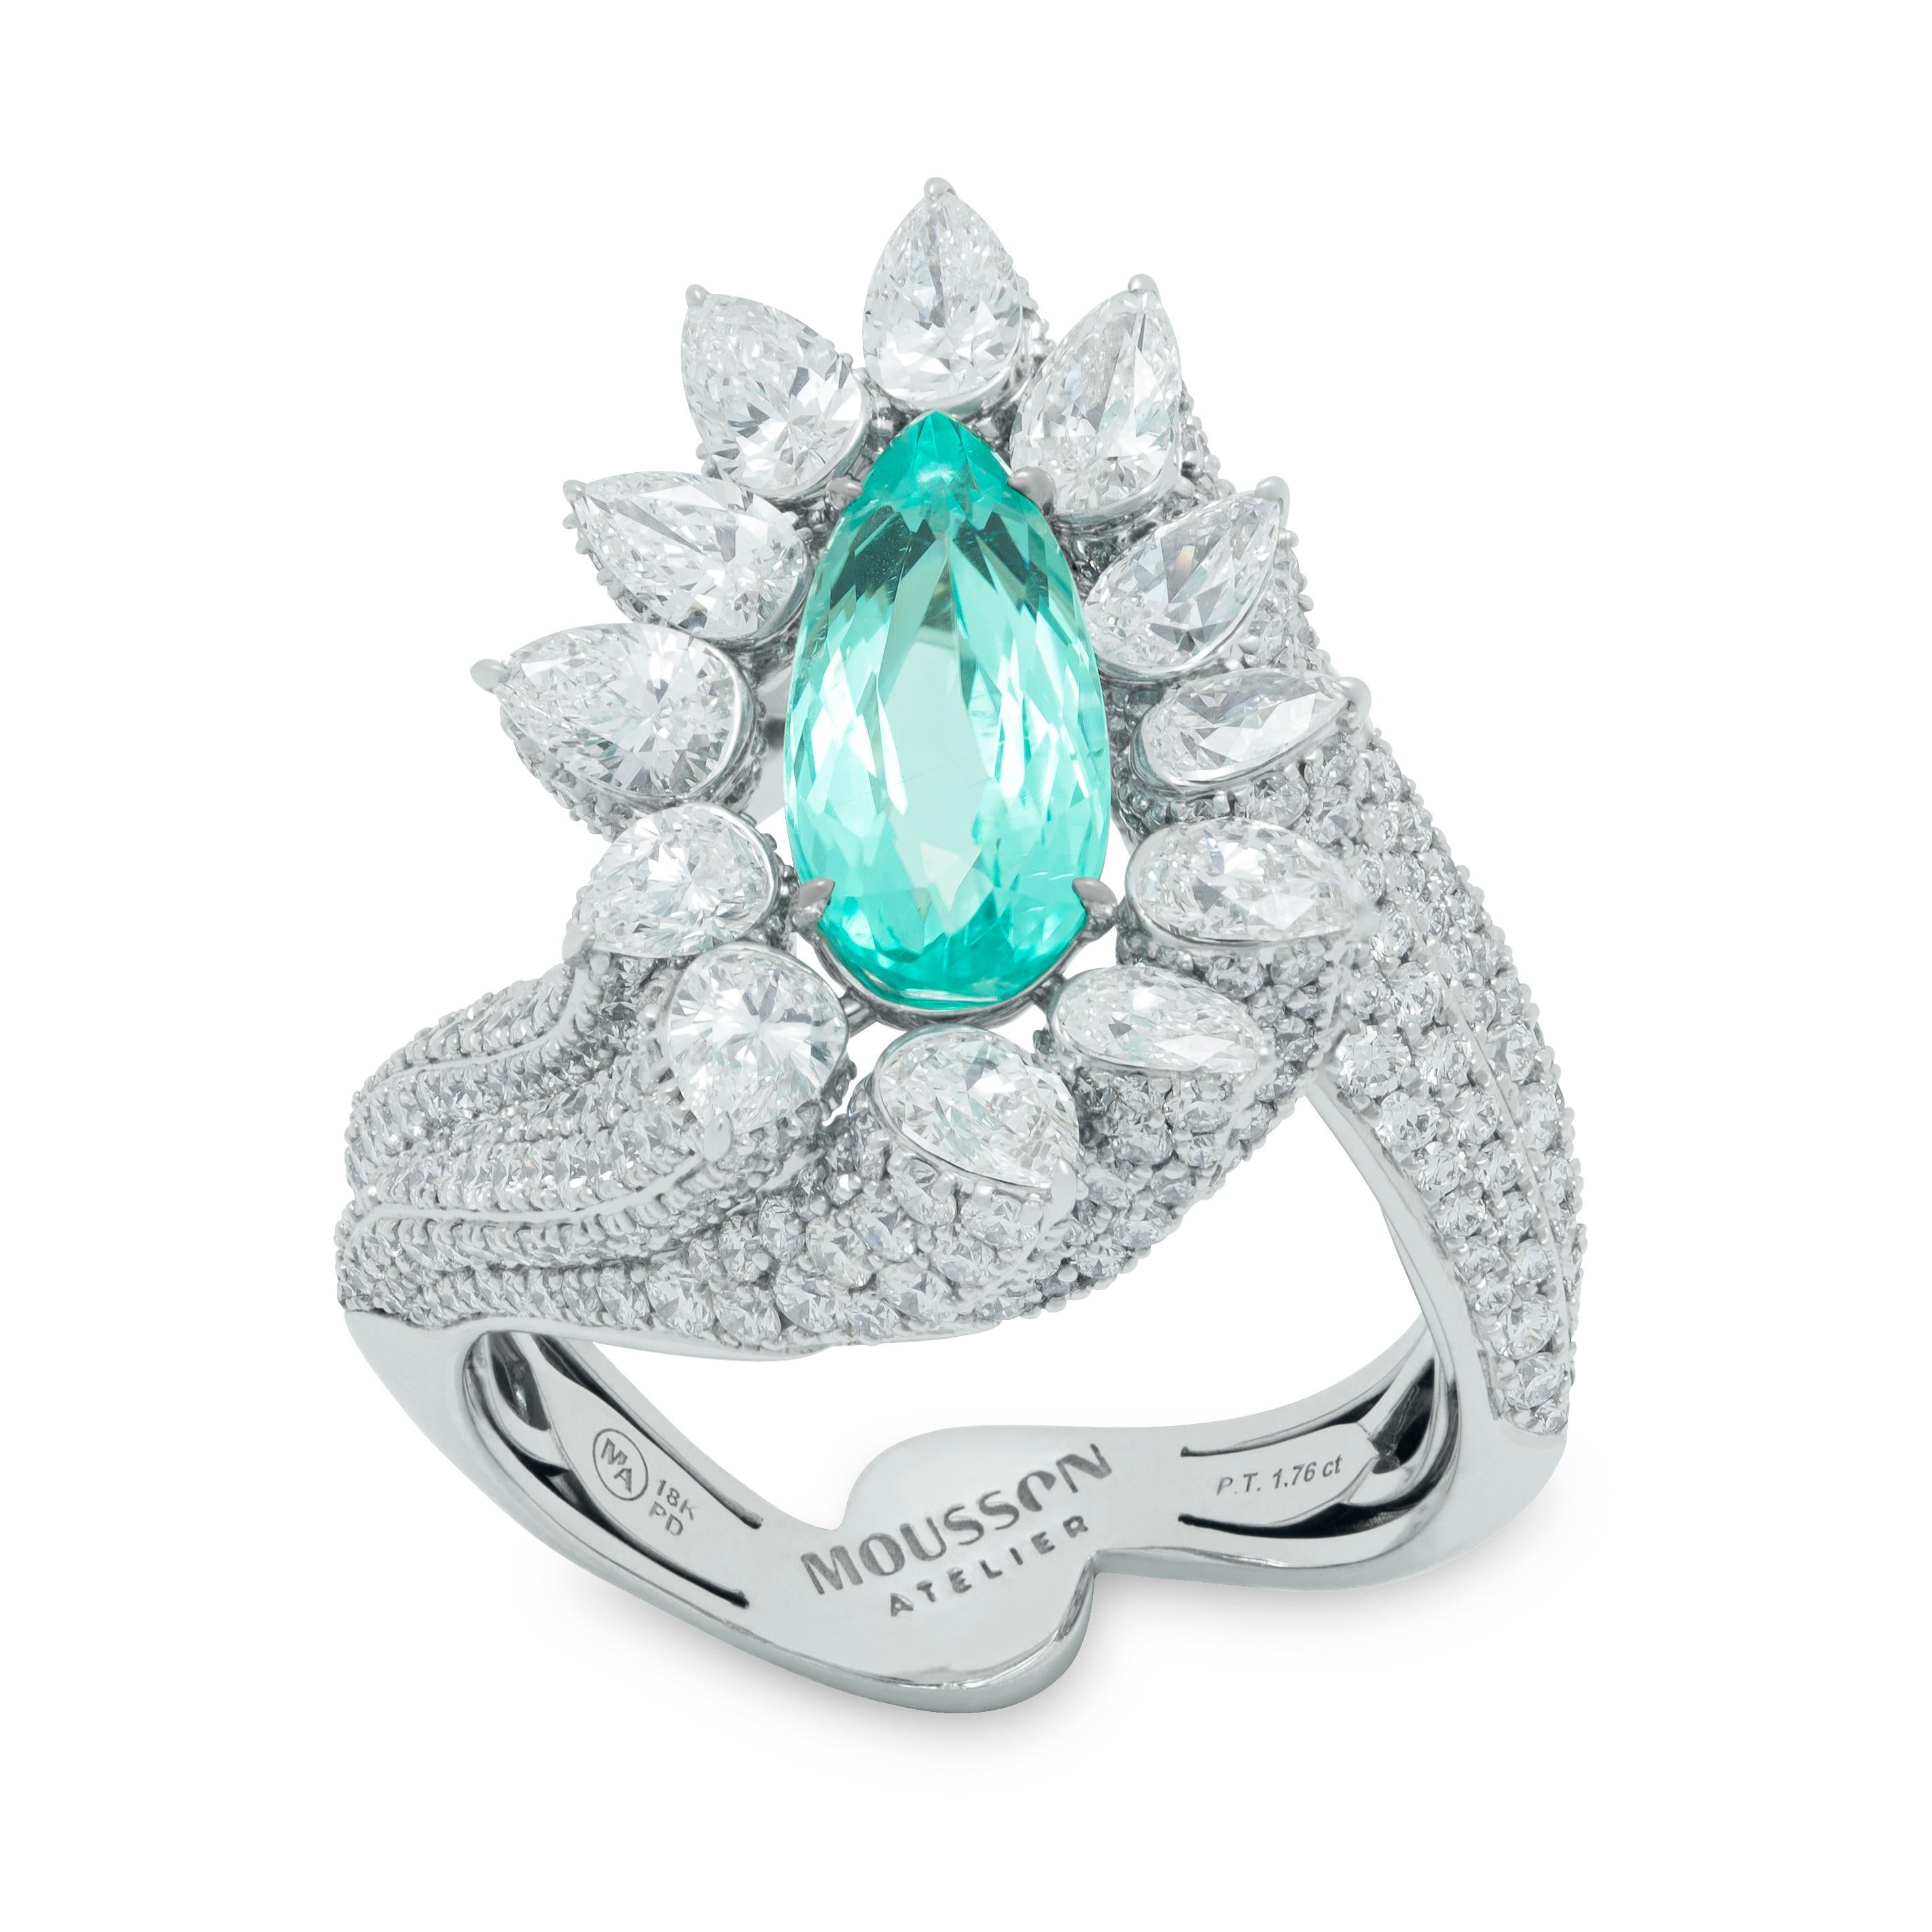 Paraiba Tourmaline 1.76 Carat Diamond 18 Karat White Gold High Jewelry Ring

This 18K White Gold, Paraiba Tourmaline, and Diamonds Ring is a stunning addition to any jewelry collection. Central stone set as the base of the ring - an incredible